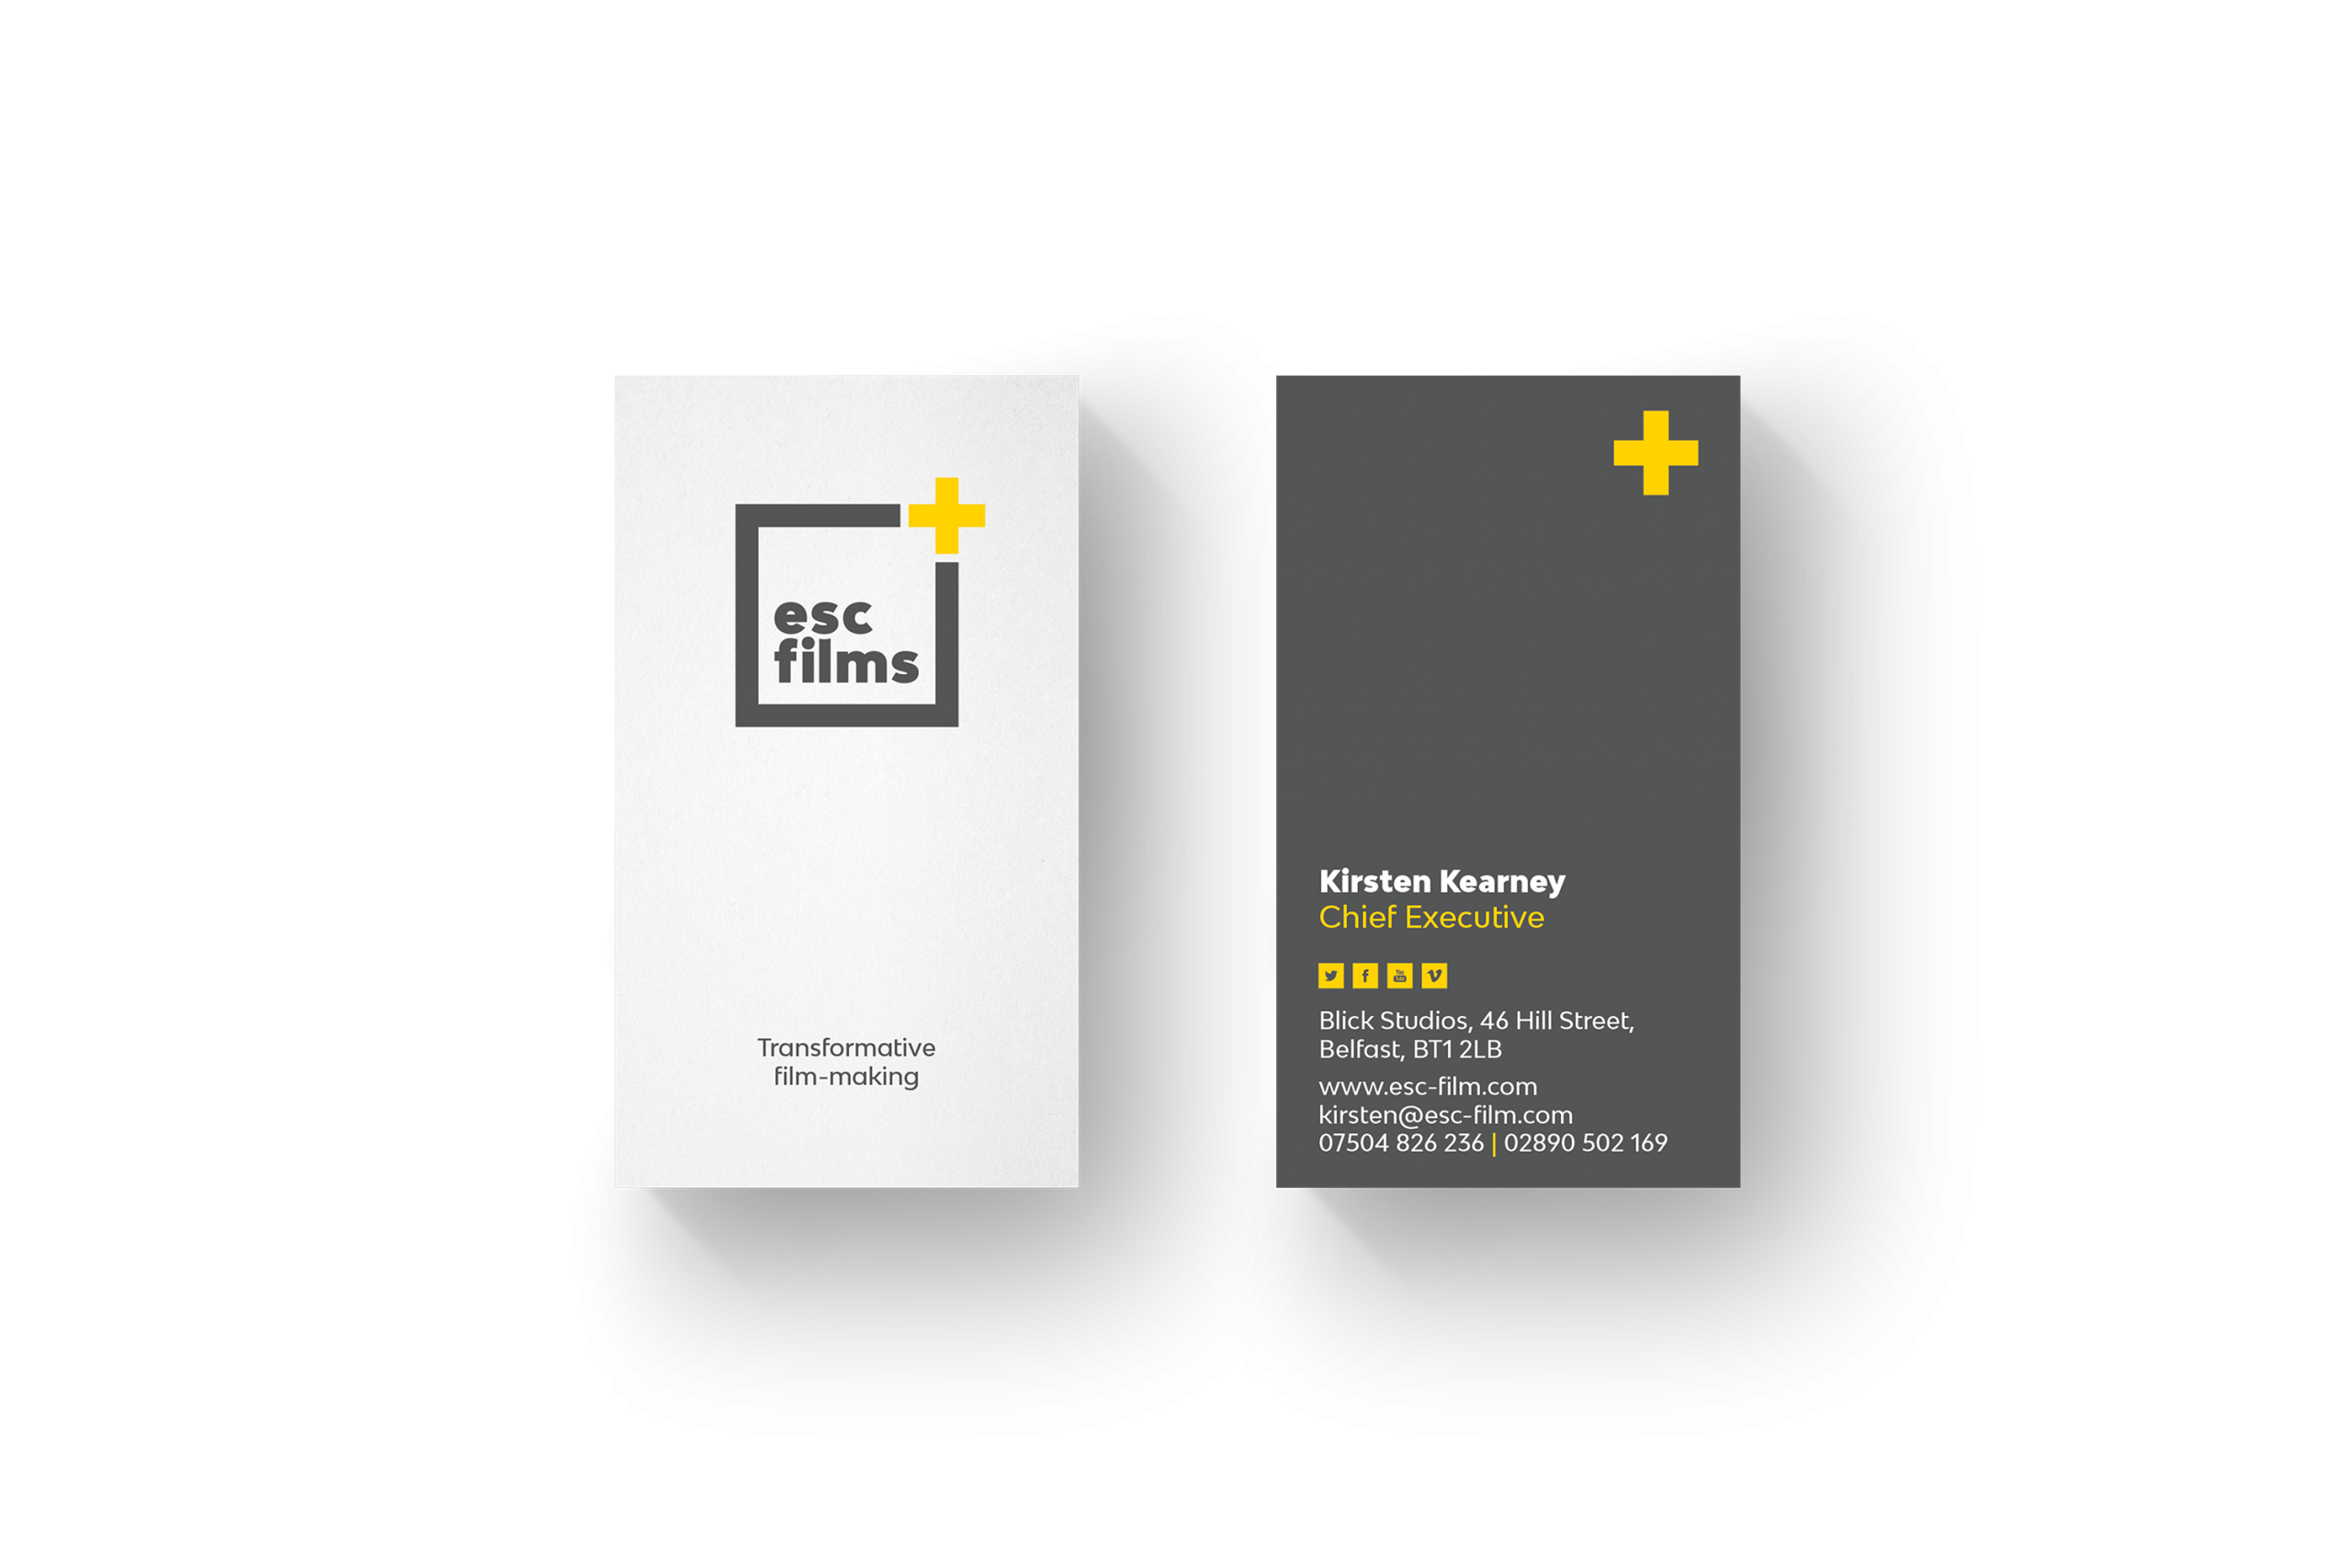 one white one grey business card with esc films logo and details